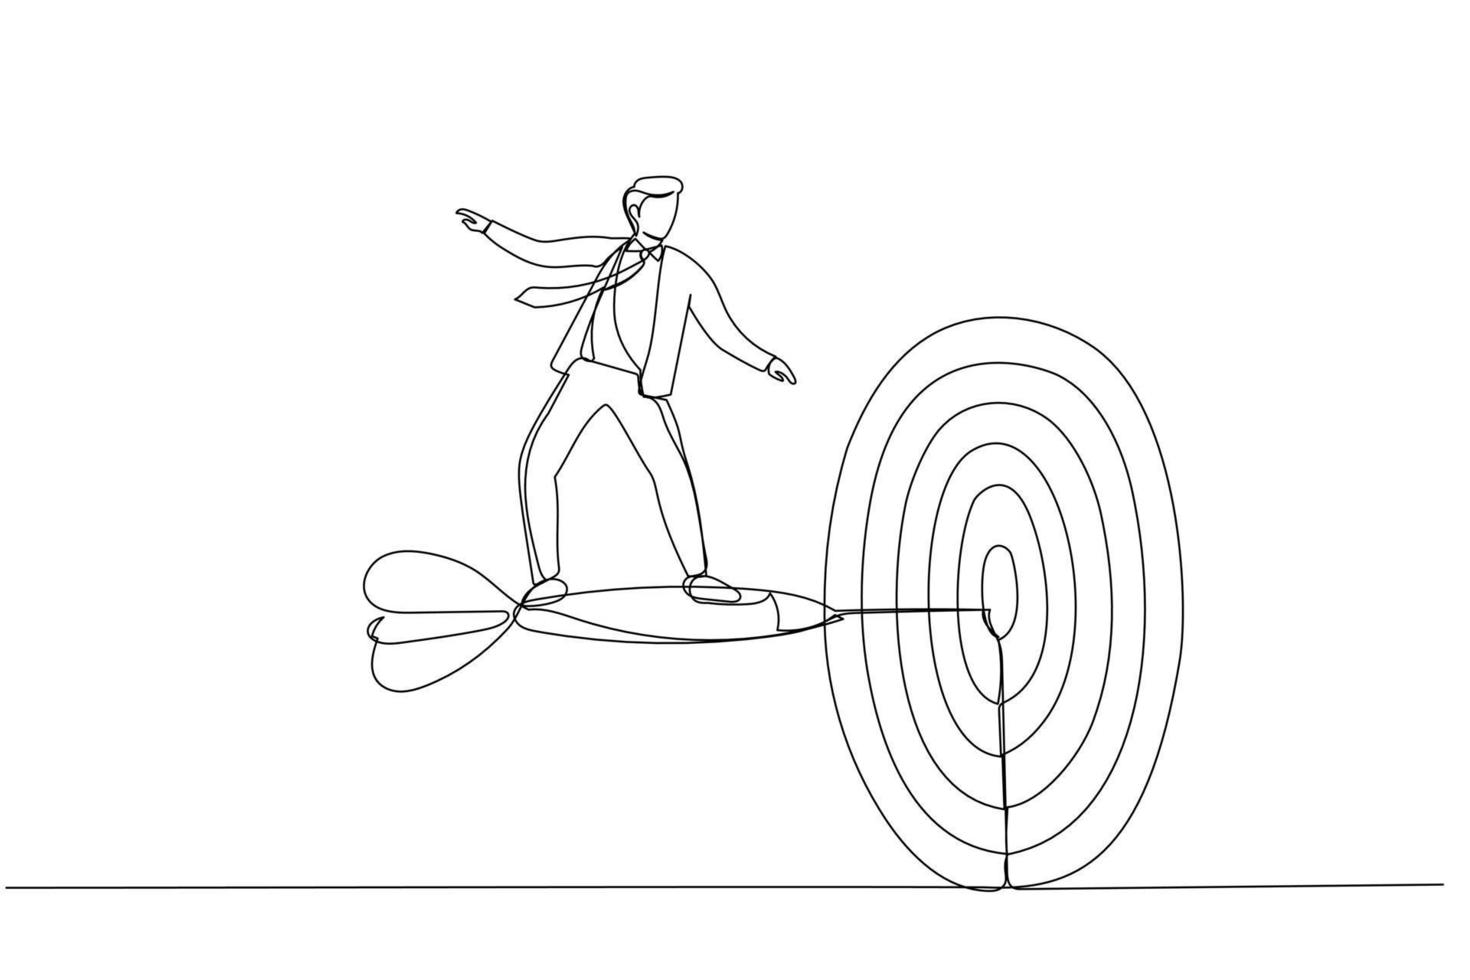 Drawing of businessman with briefcase standing on dart to achieve business goal. Metaphor for solution, achievement, mission, and direction. Single line art style vector